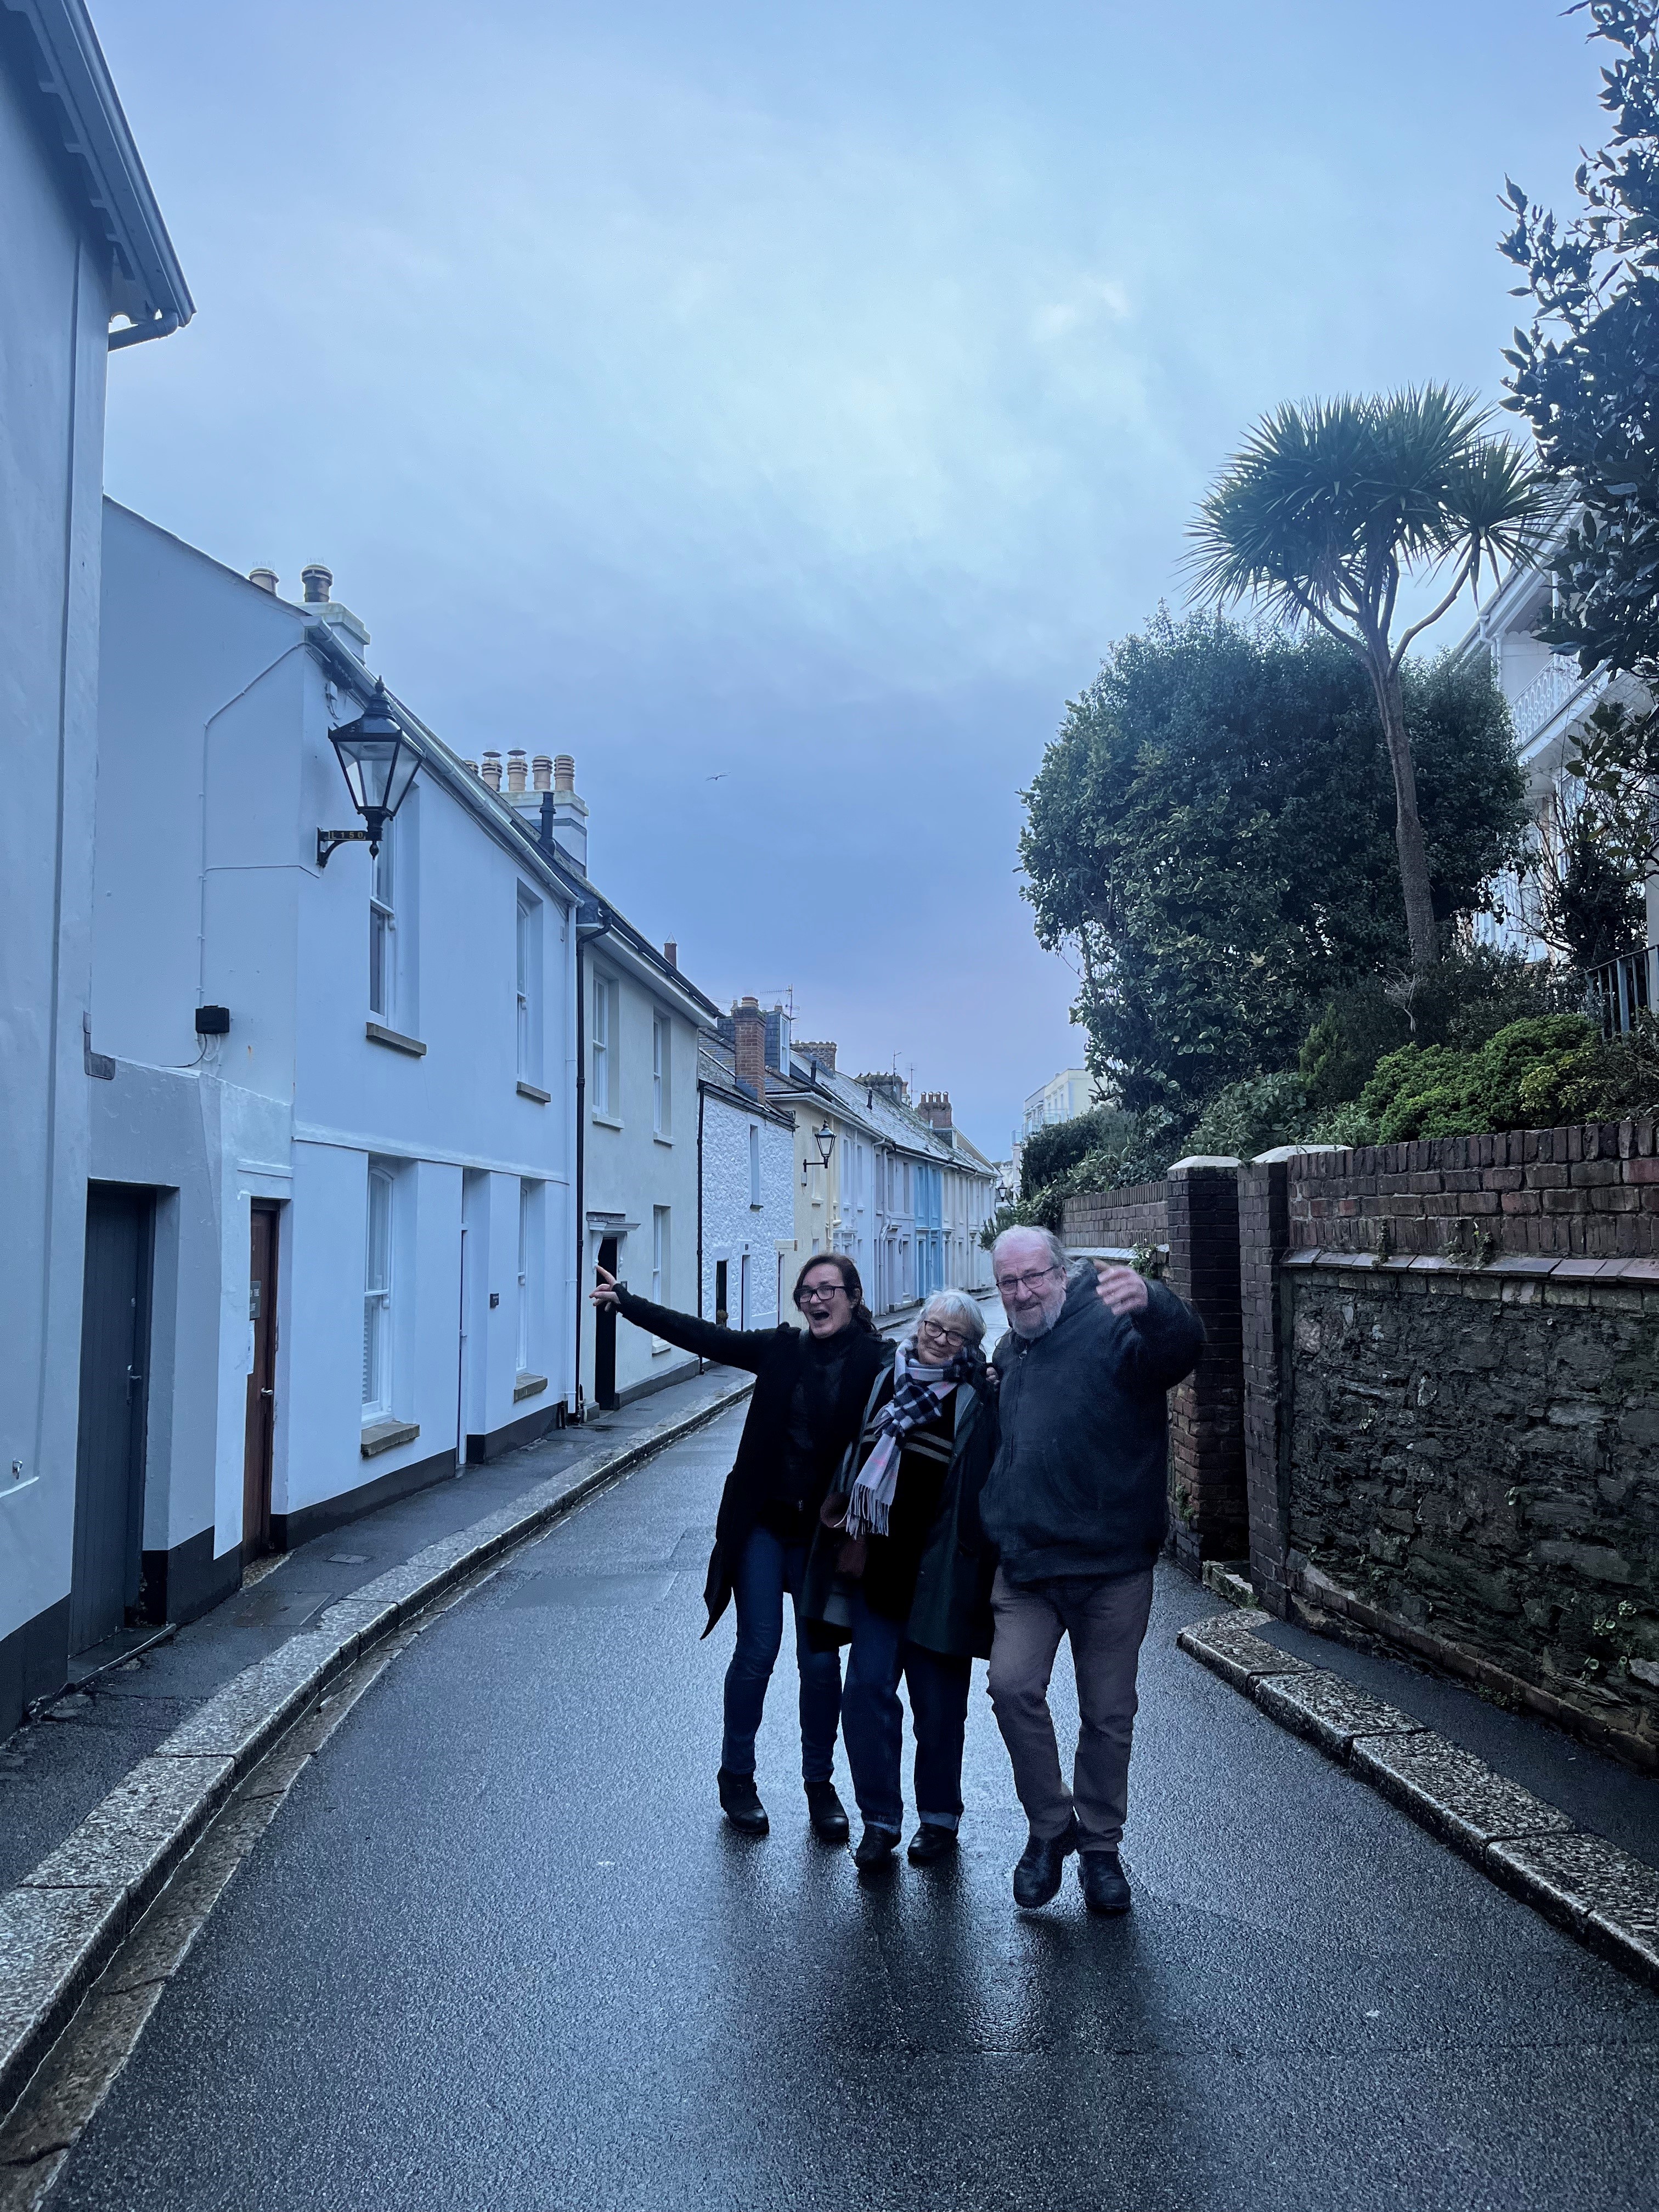 Ally and her parents pose for the camera in a street lined with houses on one side